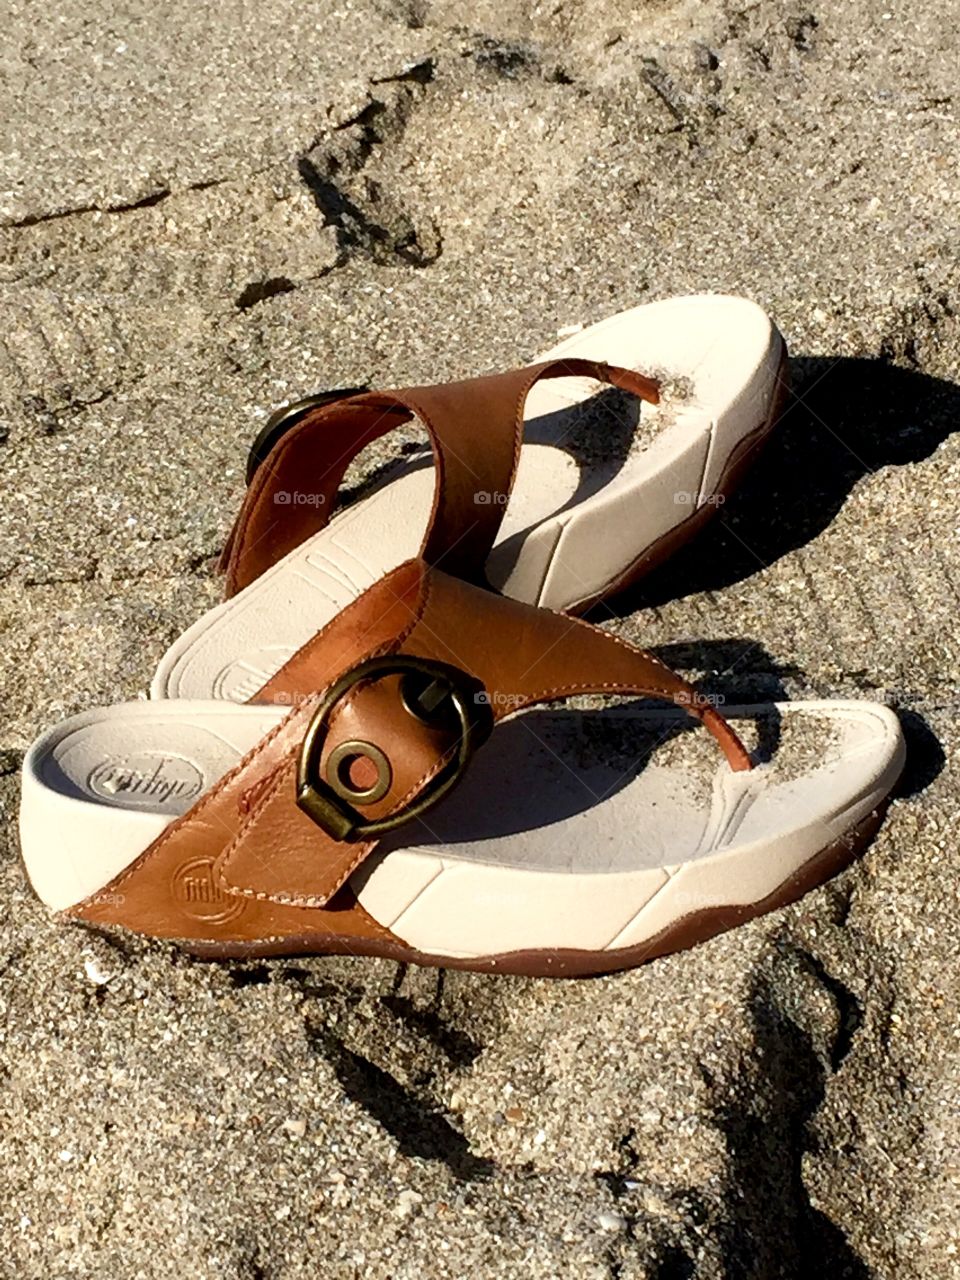 Fitflops on the beach